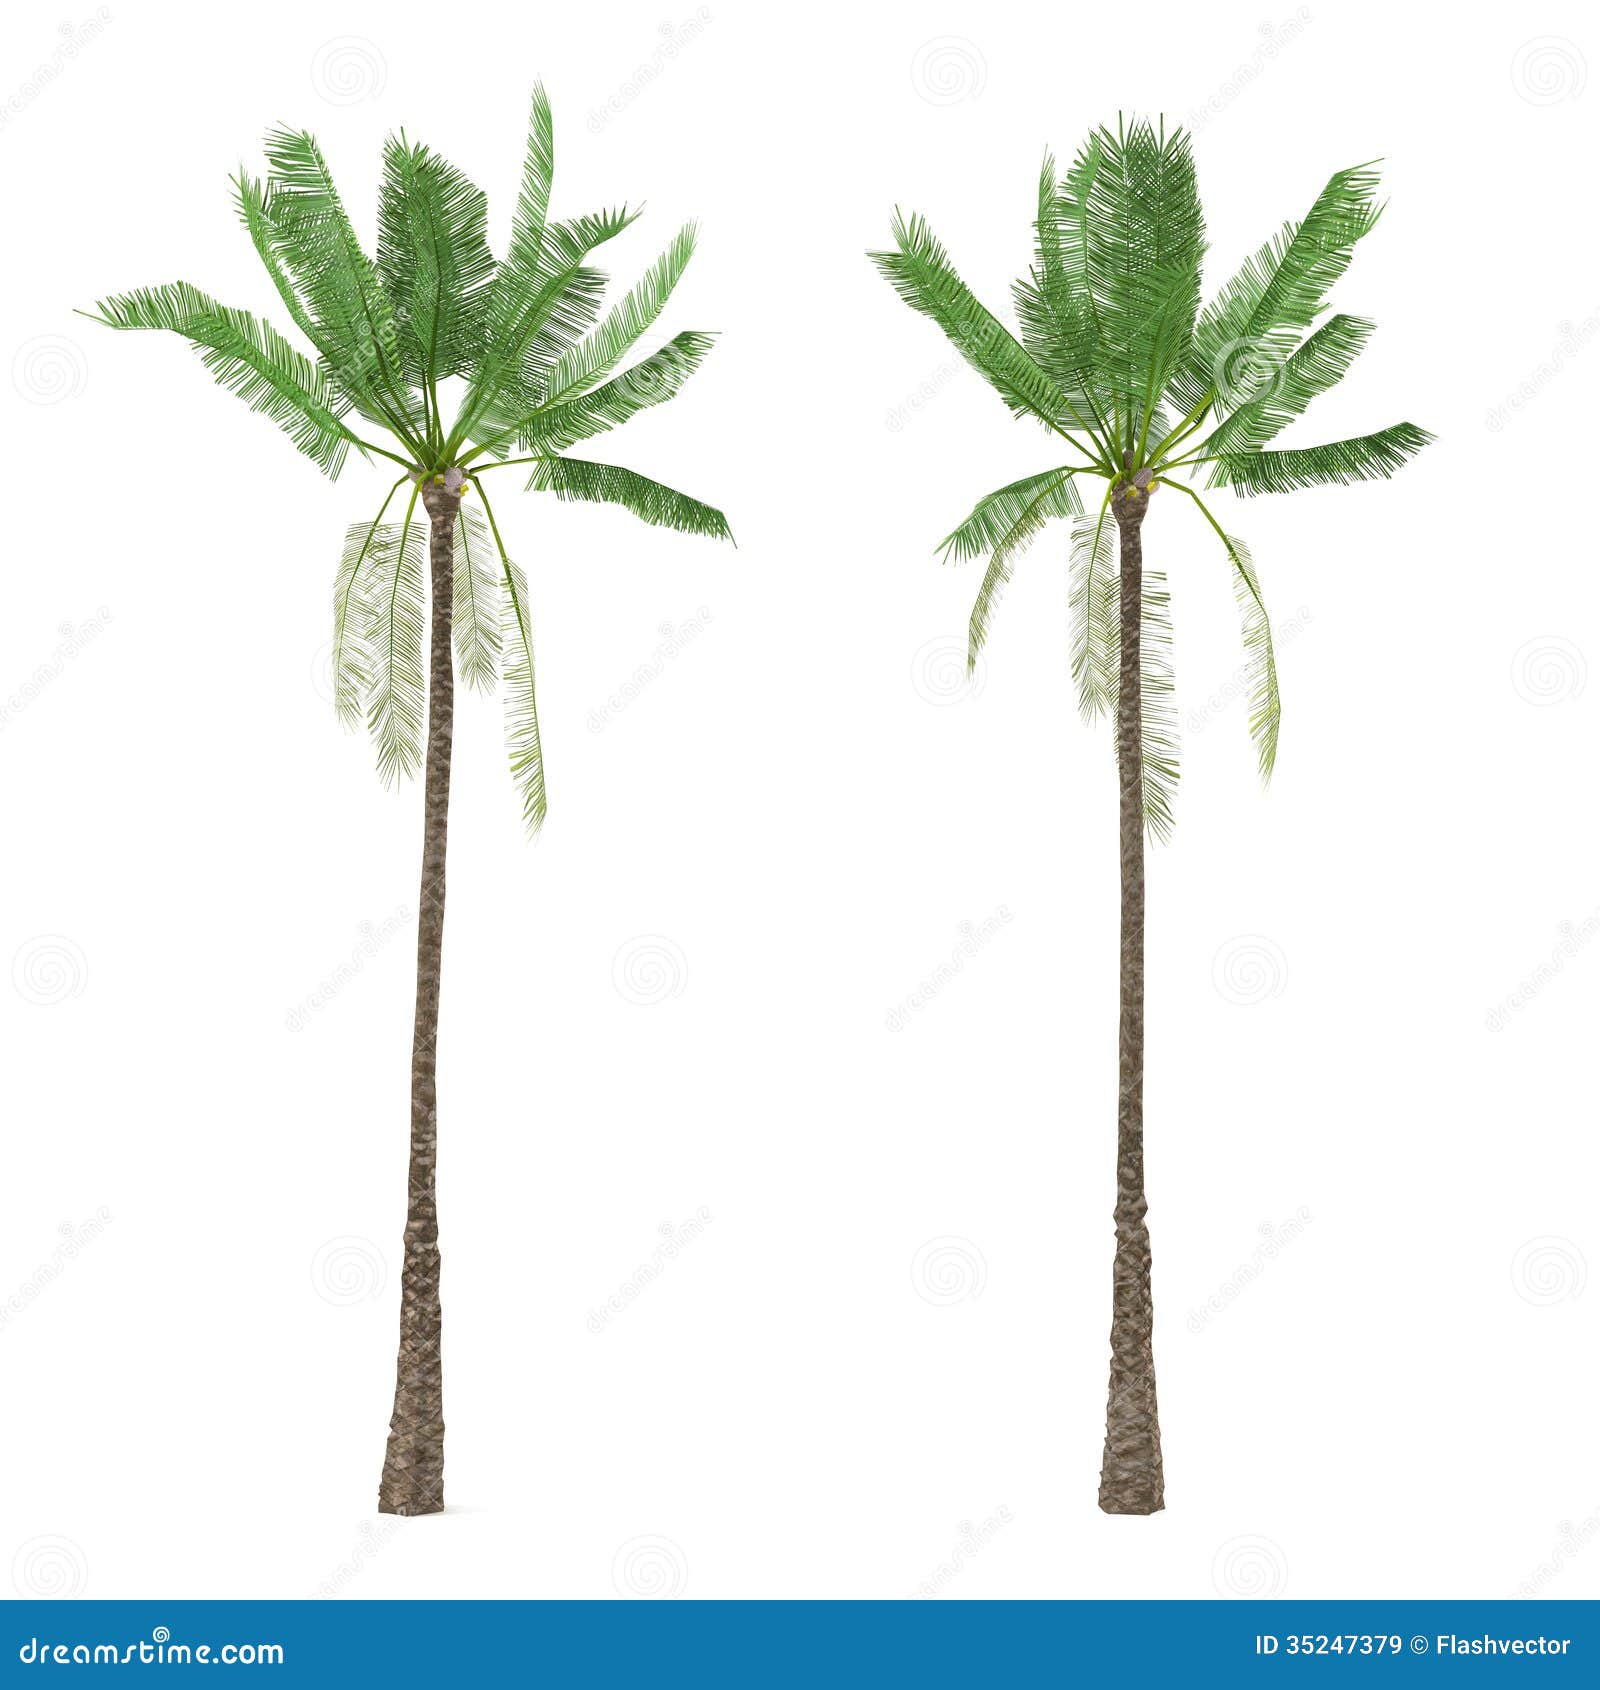 Palm tree isolated. Cocos nucifera. See my other works in portfolio.